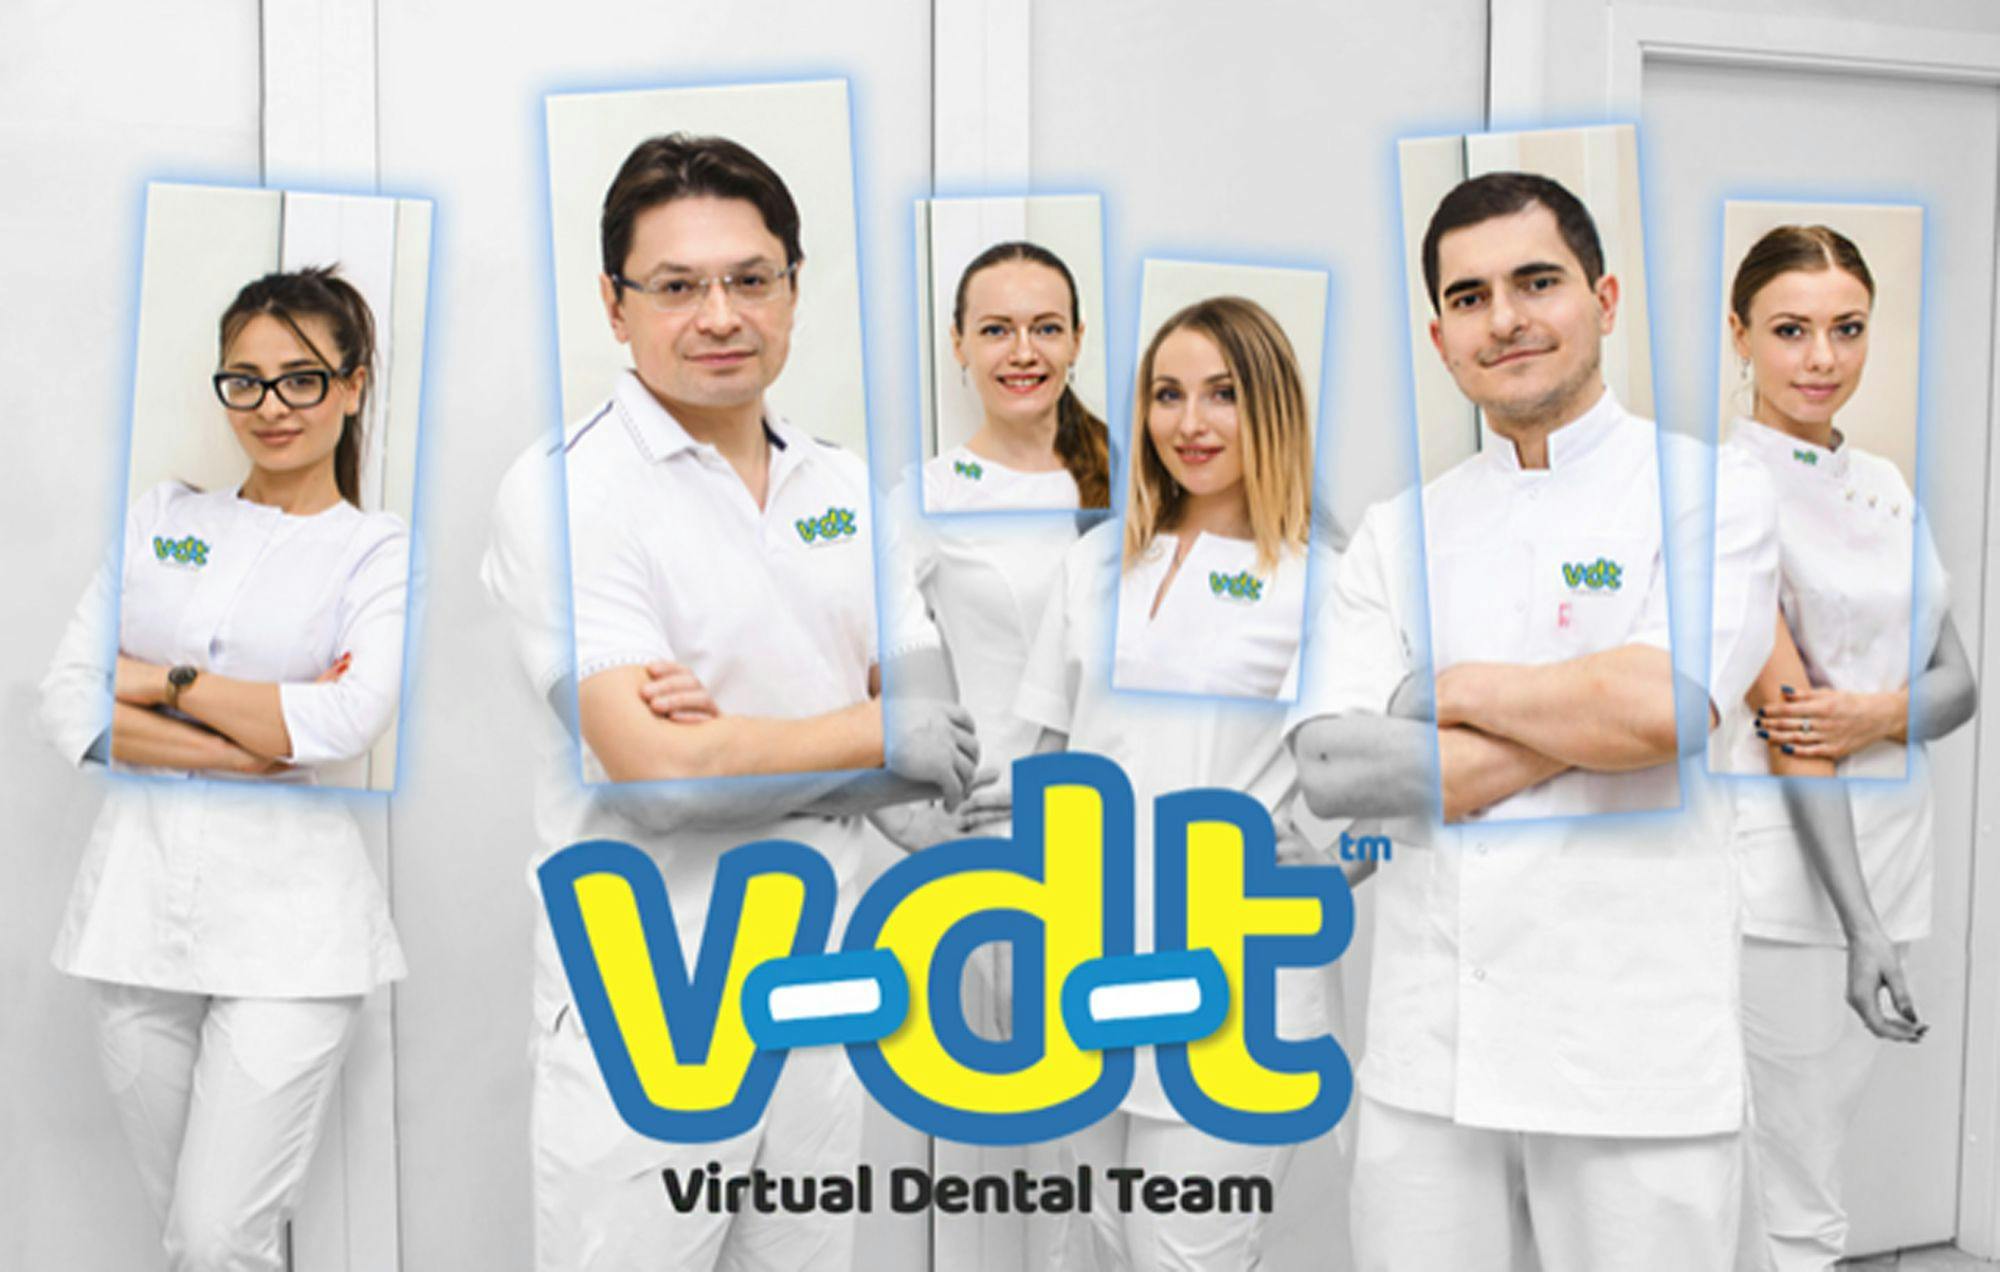 Ross Communications Launches The Virtual Dental Team : © Ross Communications